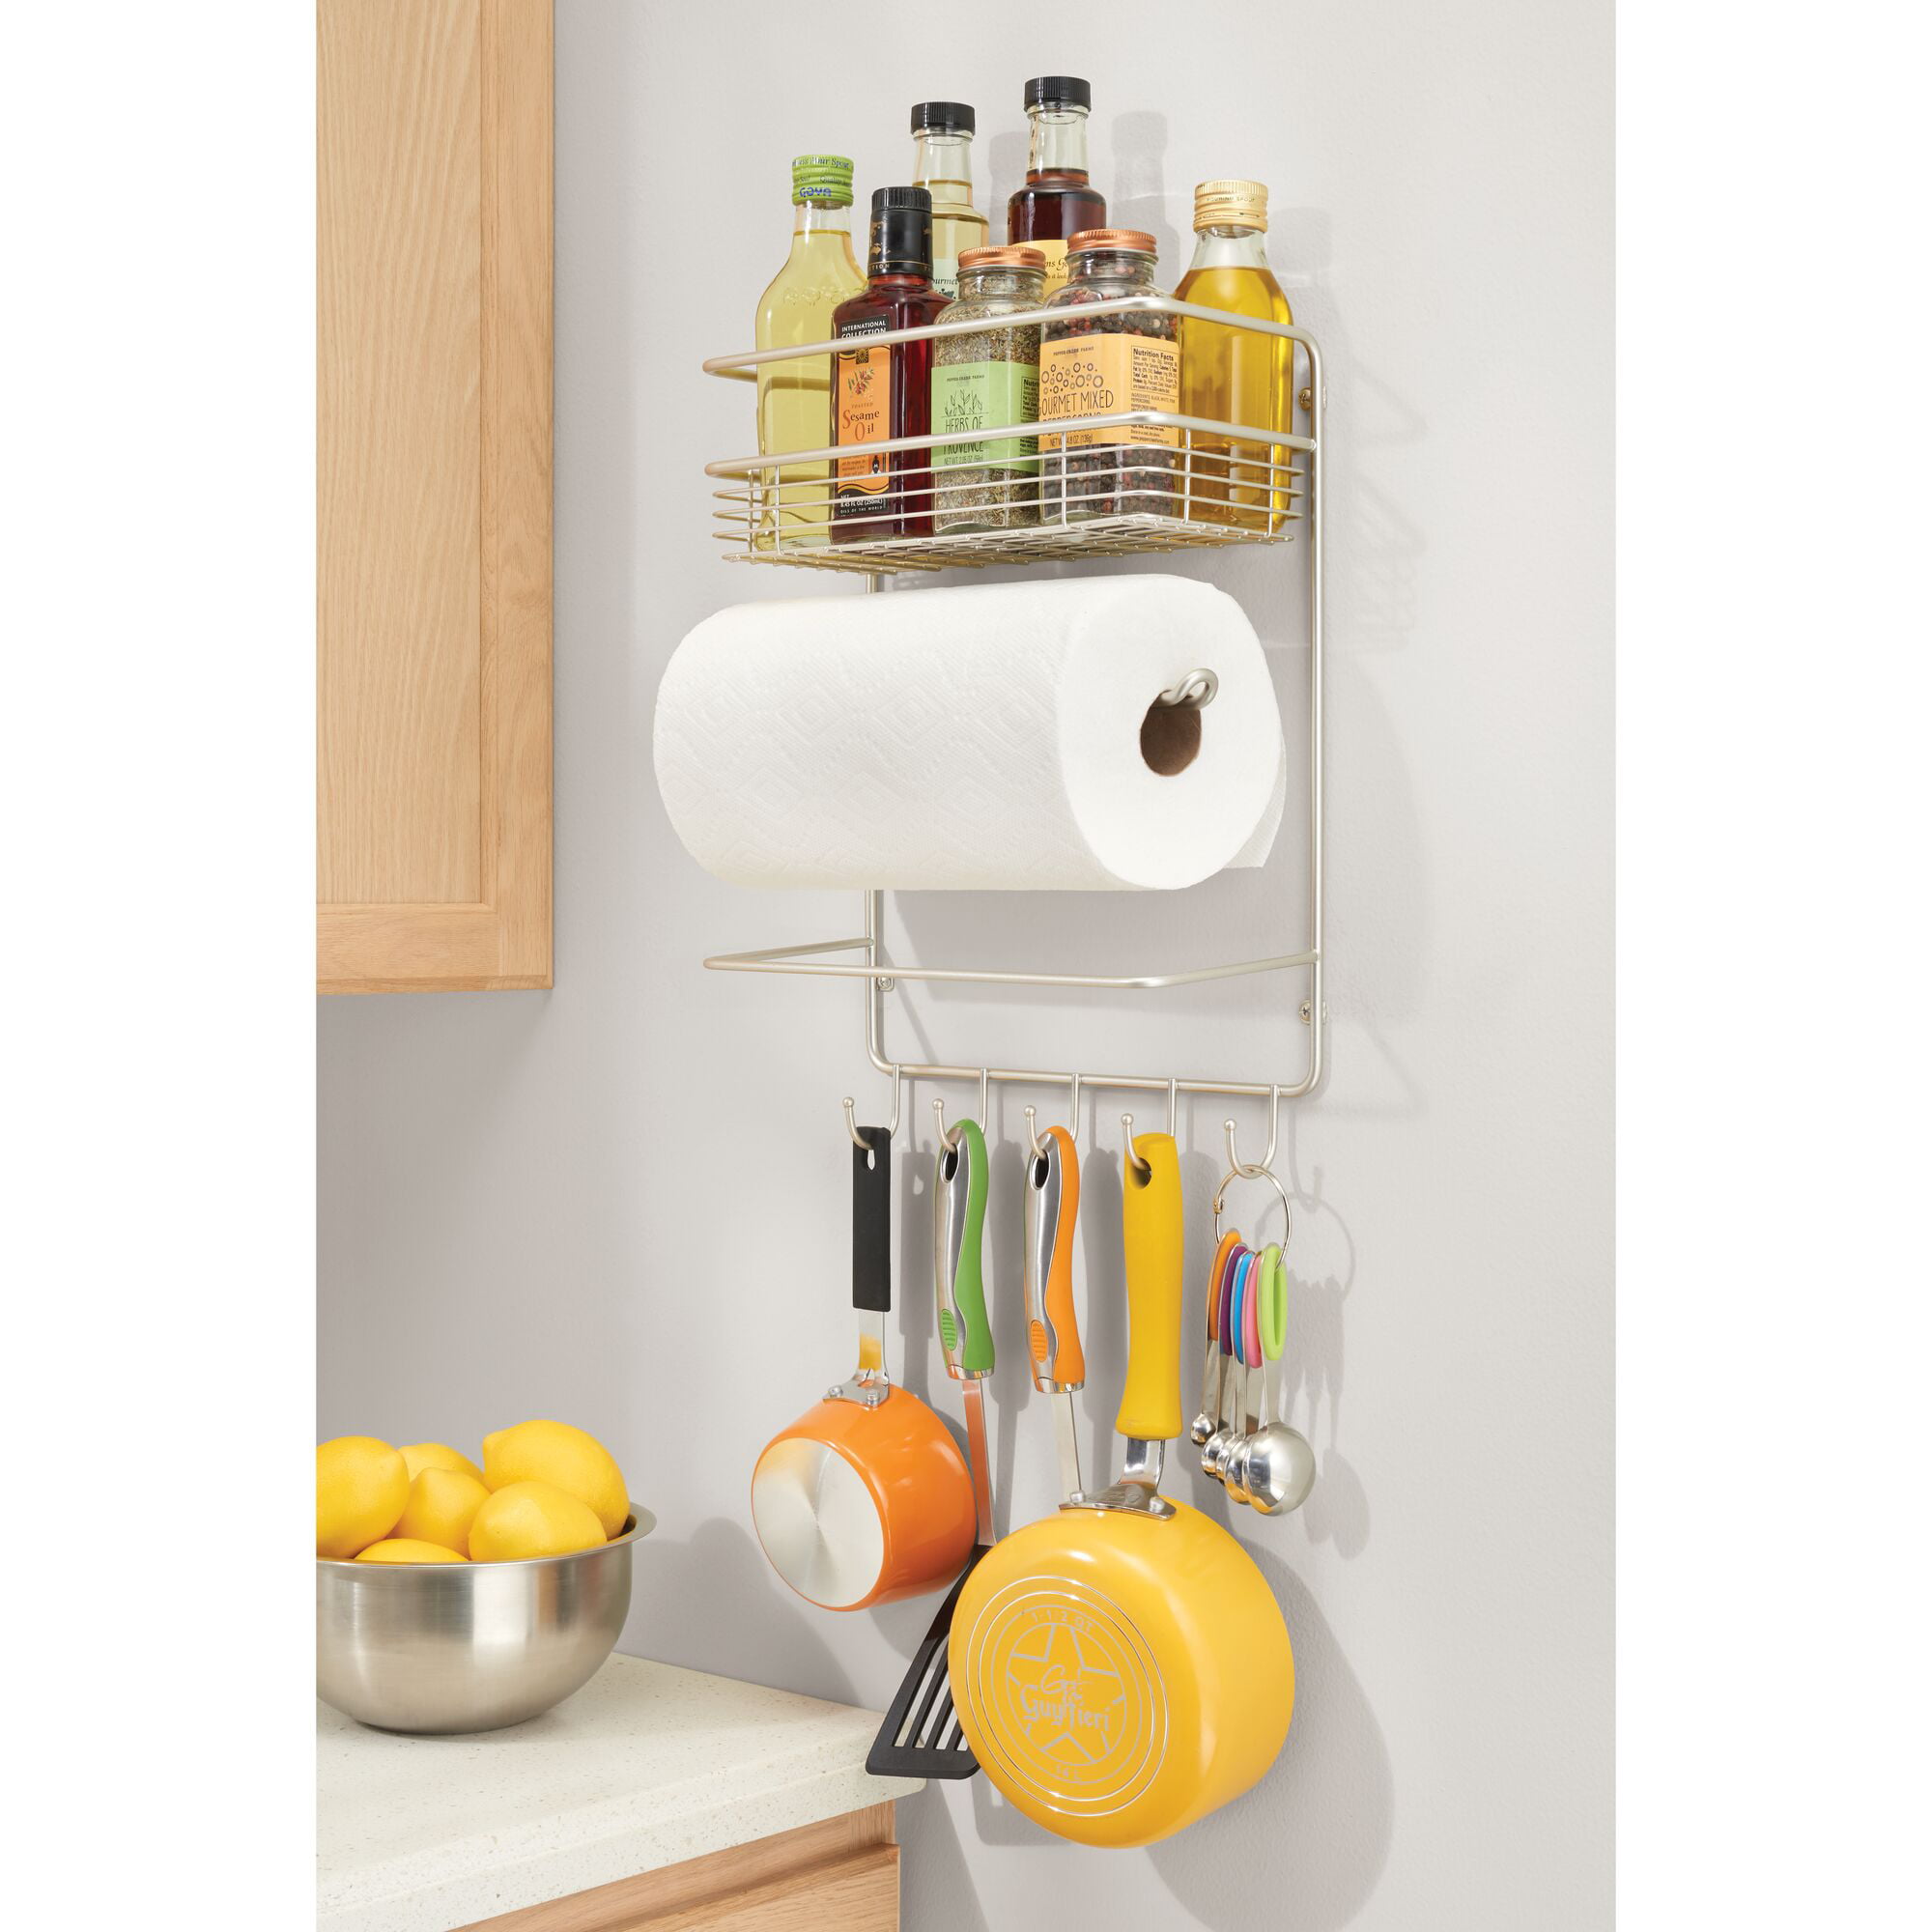 Durable Steel Wire Design Soft Brass mDesign Metal Paper Towel Holder with Spice Rack and Multi-Purpose Shelf Pantry Garage Laundry Wall Mount Storage Organizer for Kitchen 